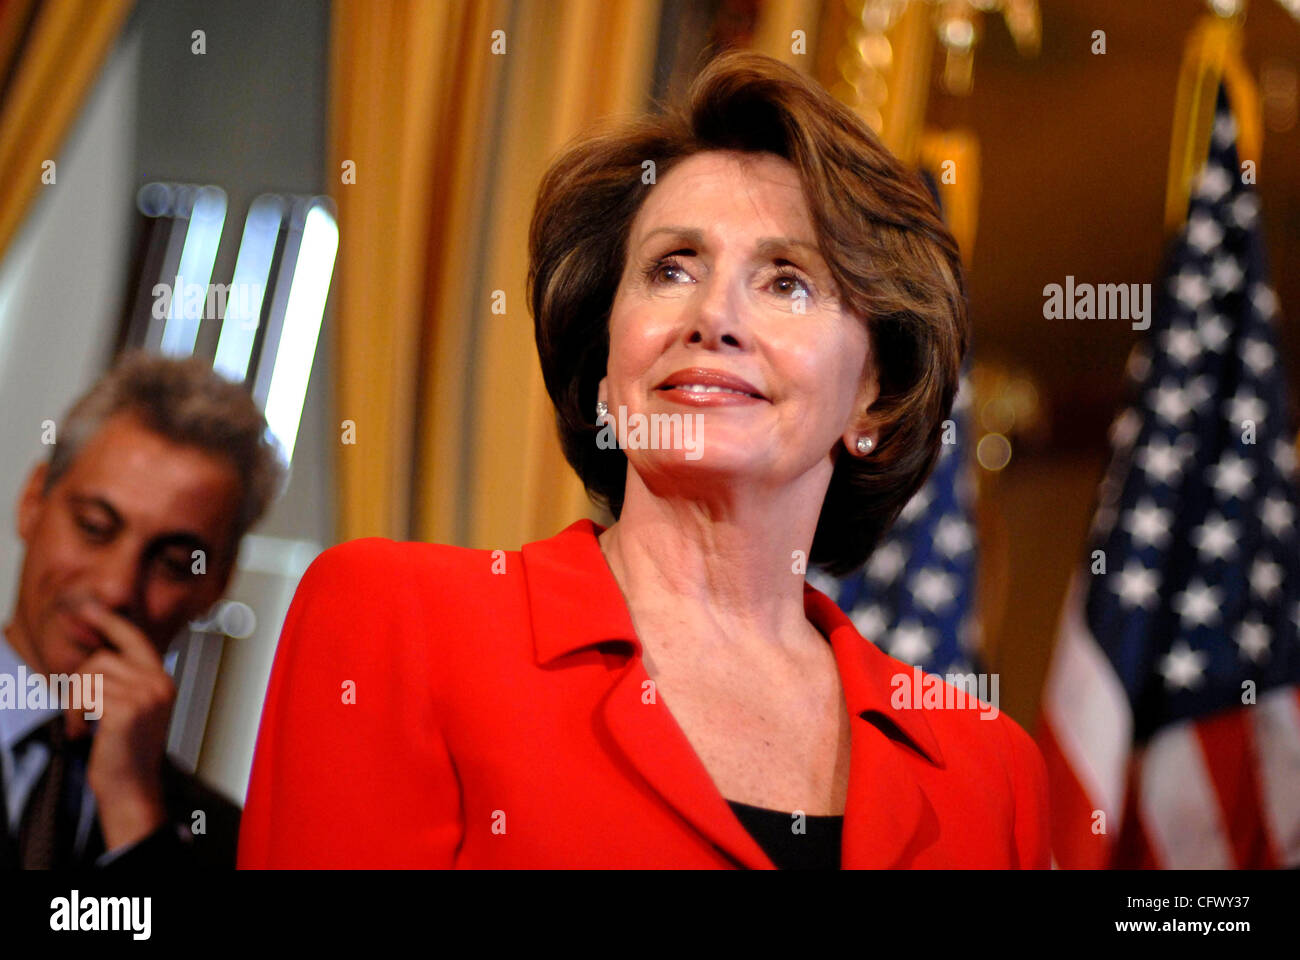 Mar 13, 2007 - Washington, DC, USA - Speaker of the House NANCY PELOSI (D-CA) and the Democratic House leadership team, including RAHM EMANUEL (D-IL), behind Pelosi, meets with reporters to discuss new and upcoming 'accountability legislation,' which House Democrats tout as exercising Congress' chec Stock Photo